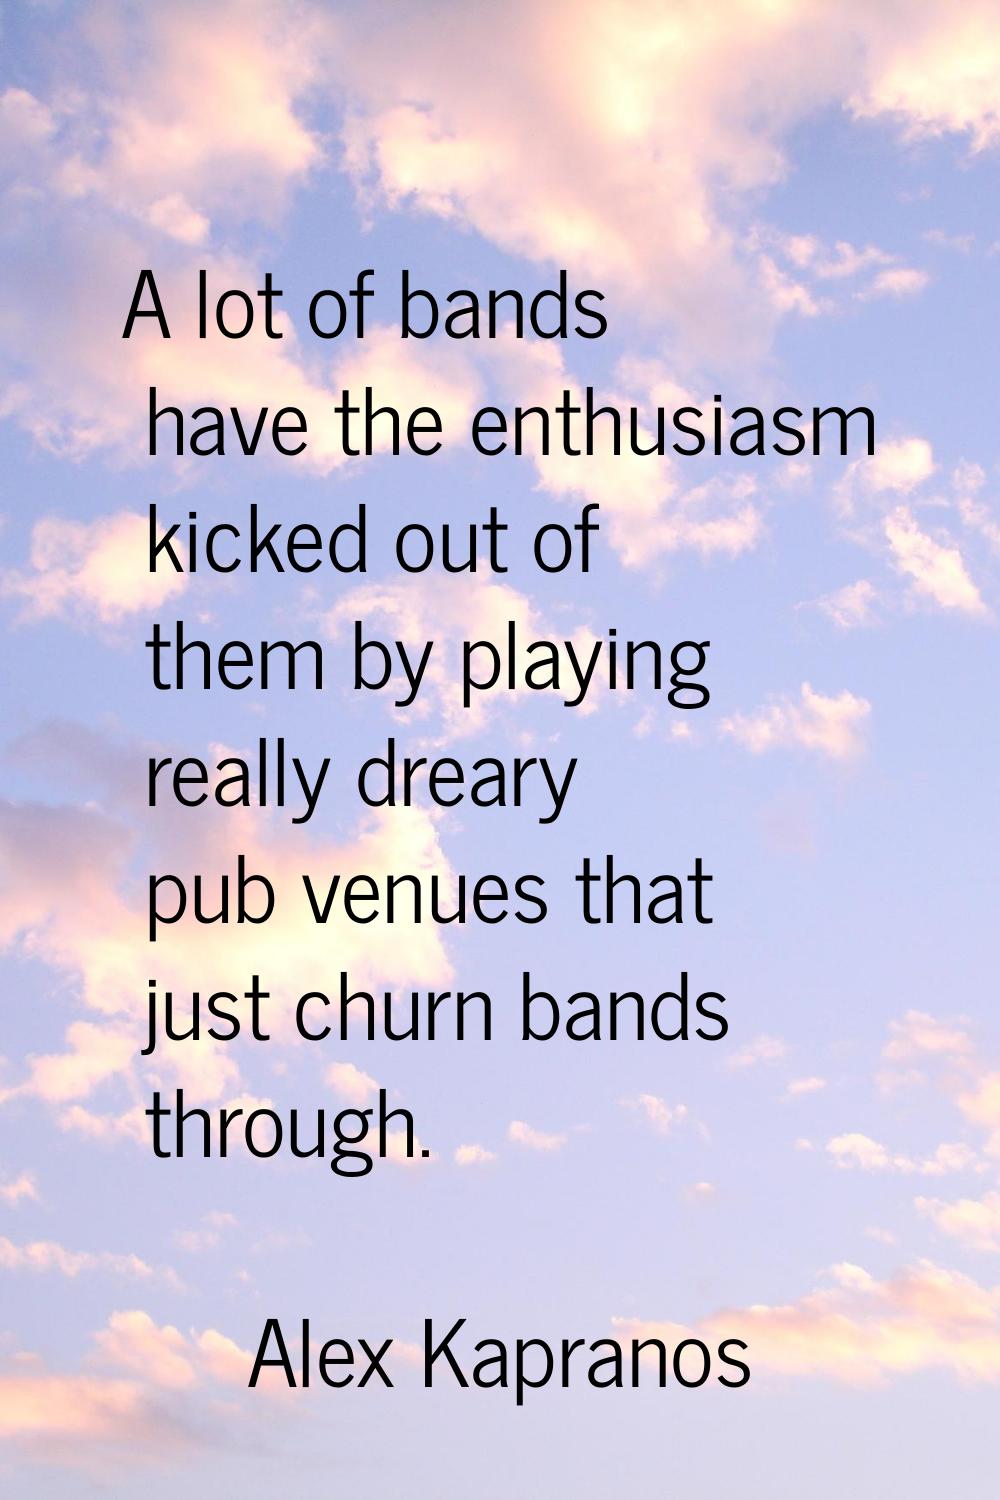 A lot of bands have the enthusiasm kicked out of them by playing really dreary pub venues that just